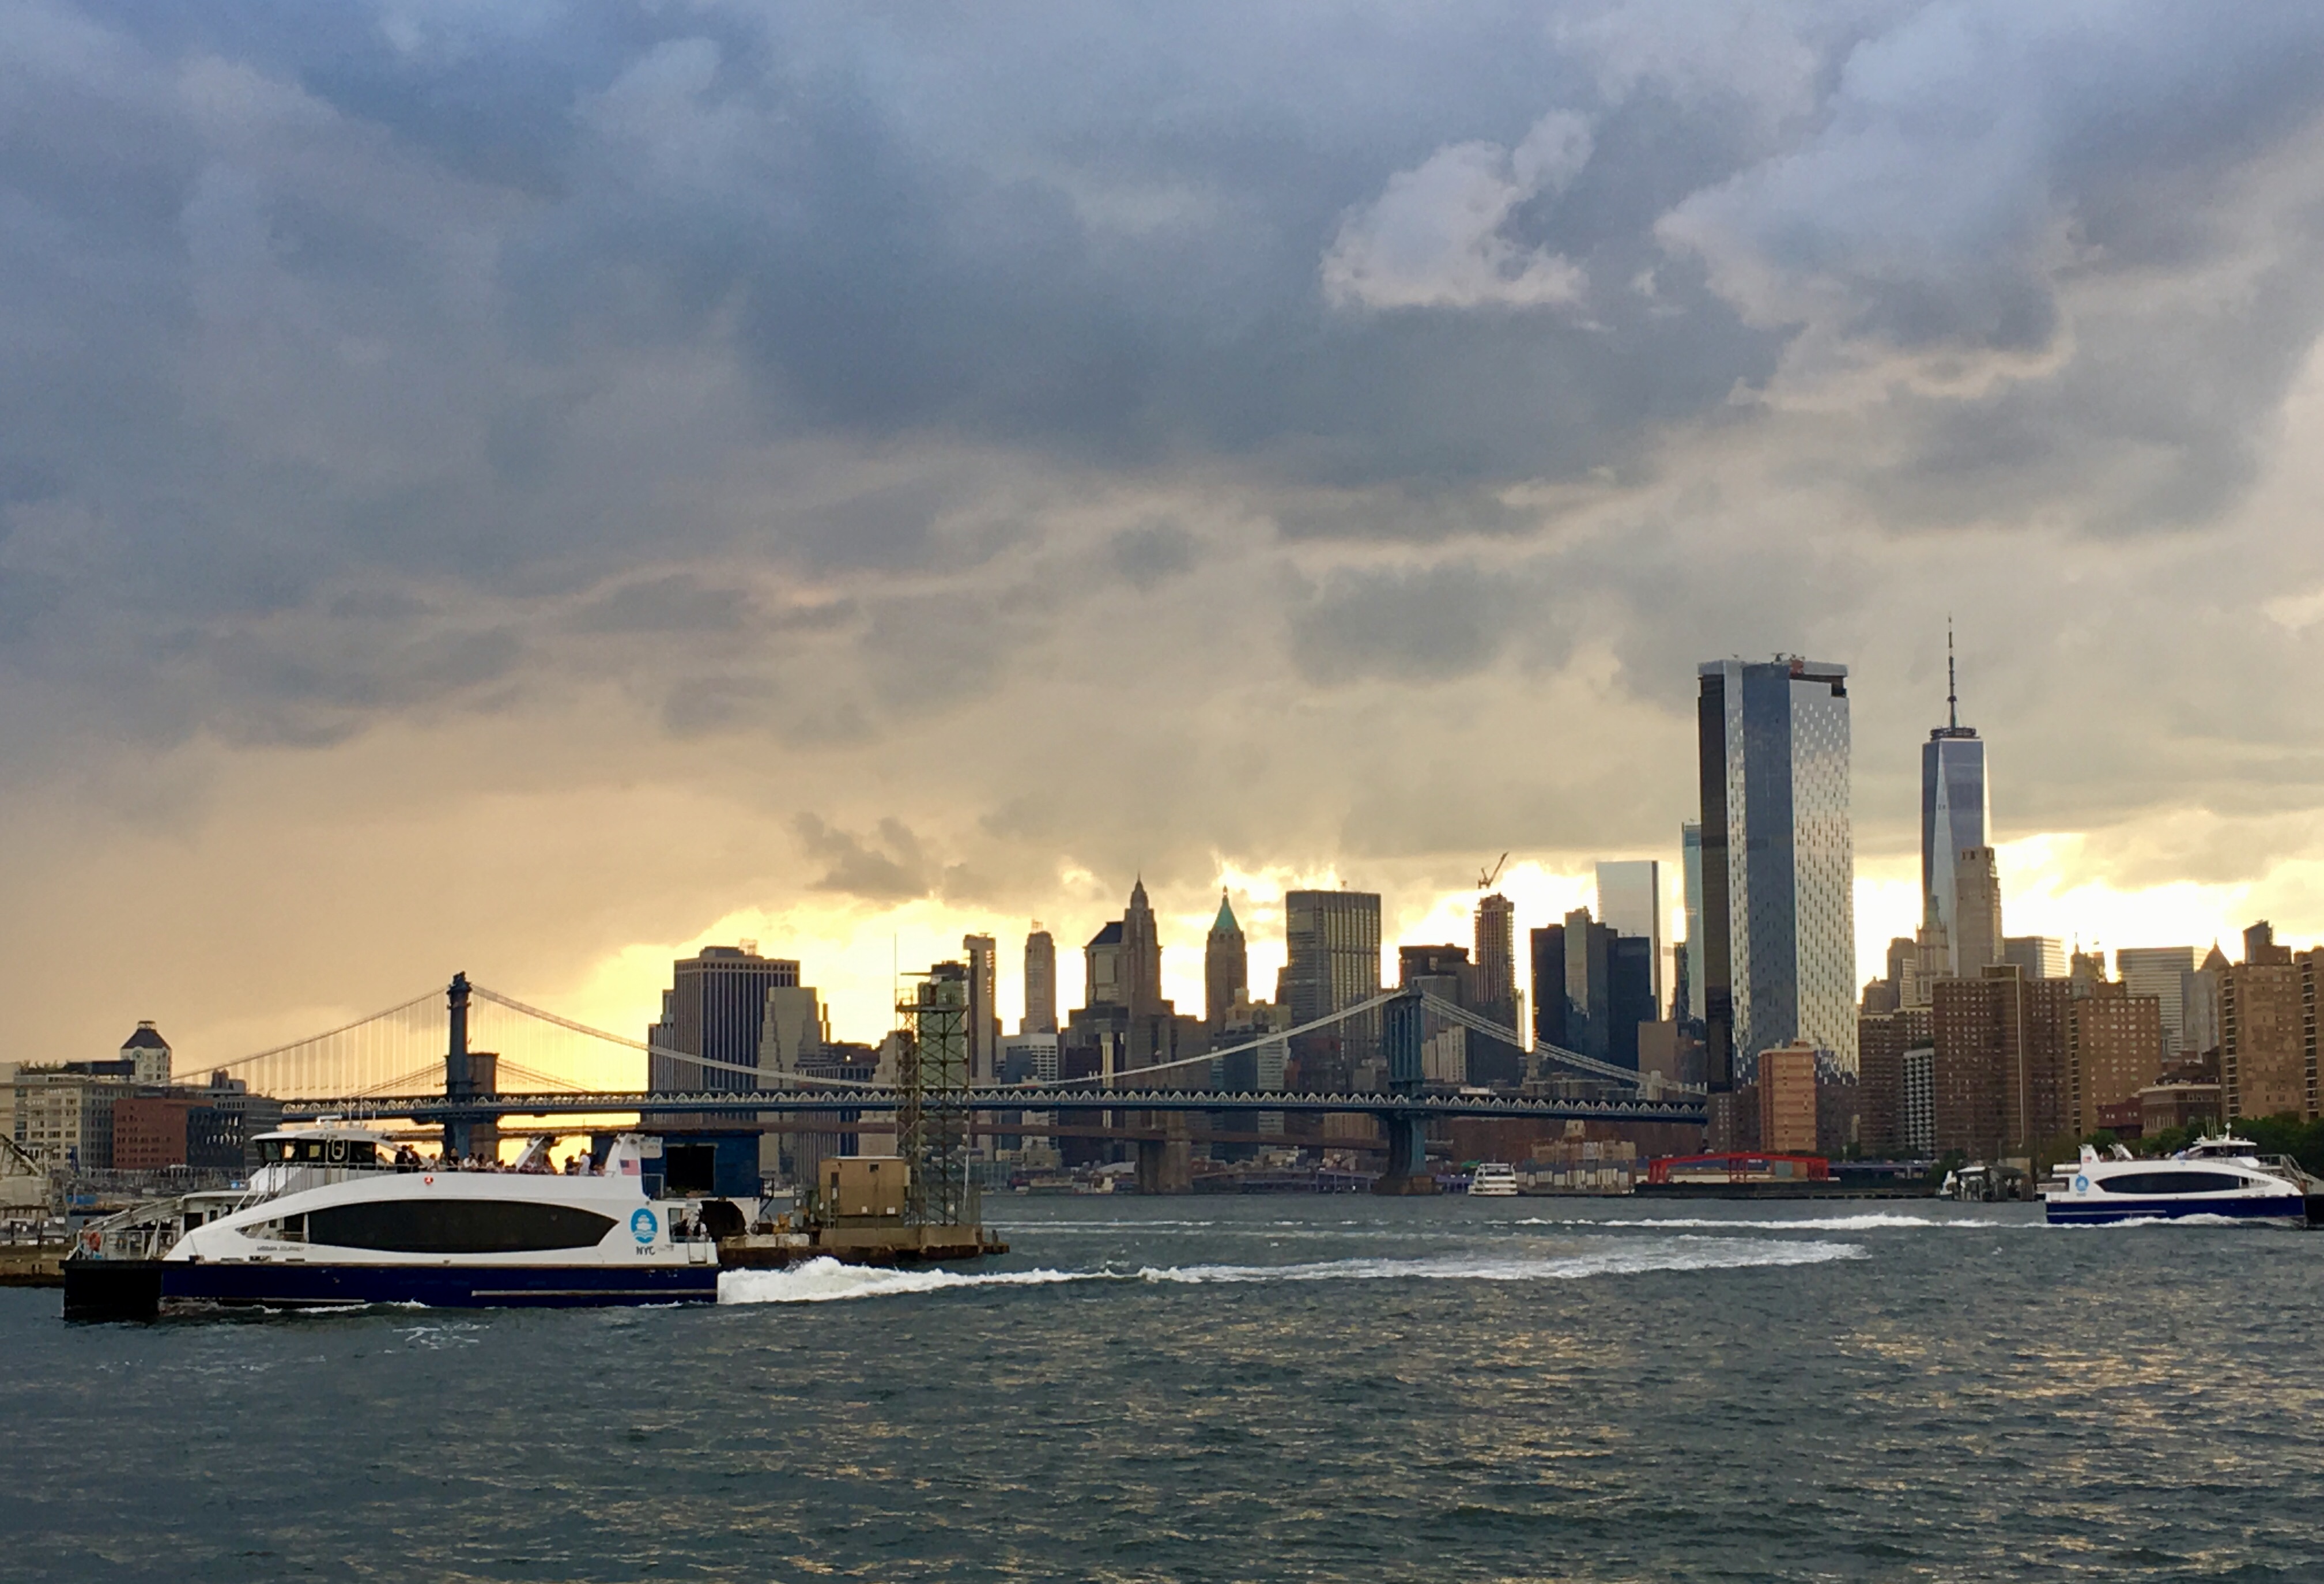 From the promenade behind Spitzer Enterprises’ glass towers, you can get an eyeful of weather drama across the river in Manhattan. Eagle photo by Lore Croghan 